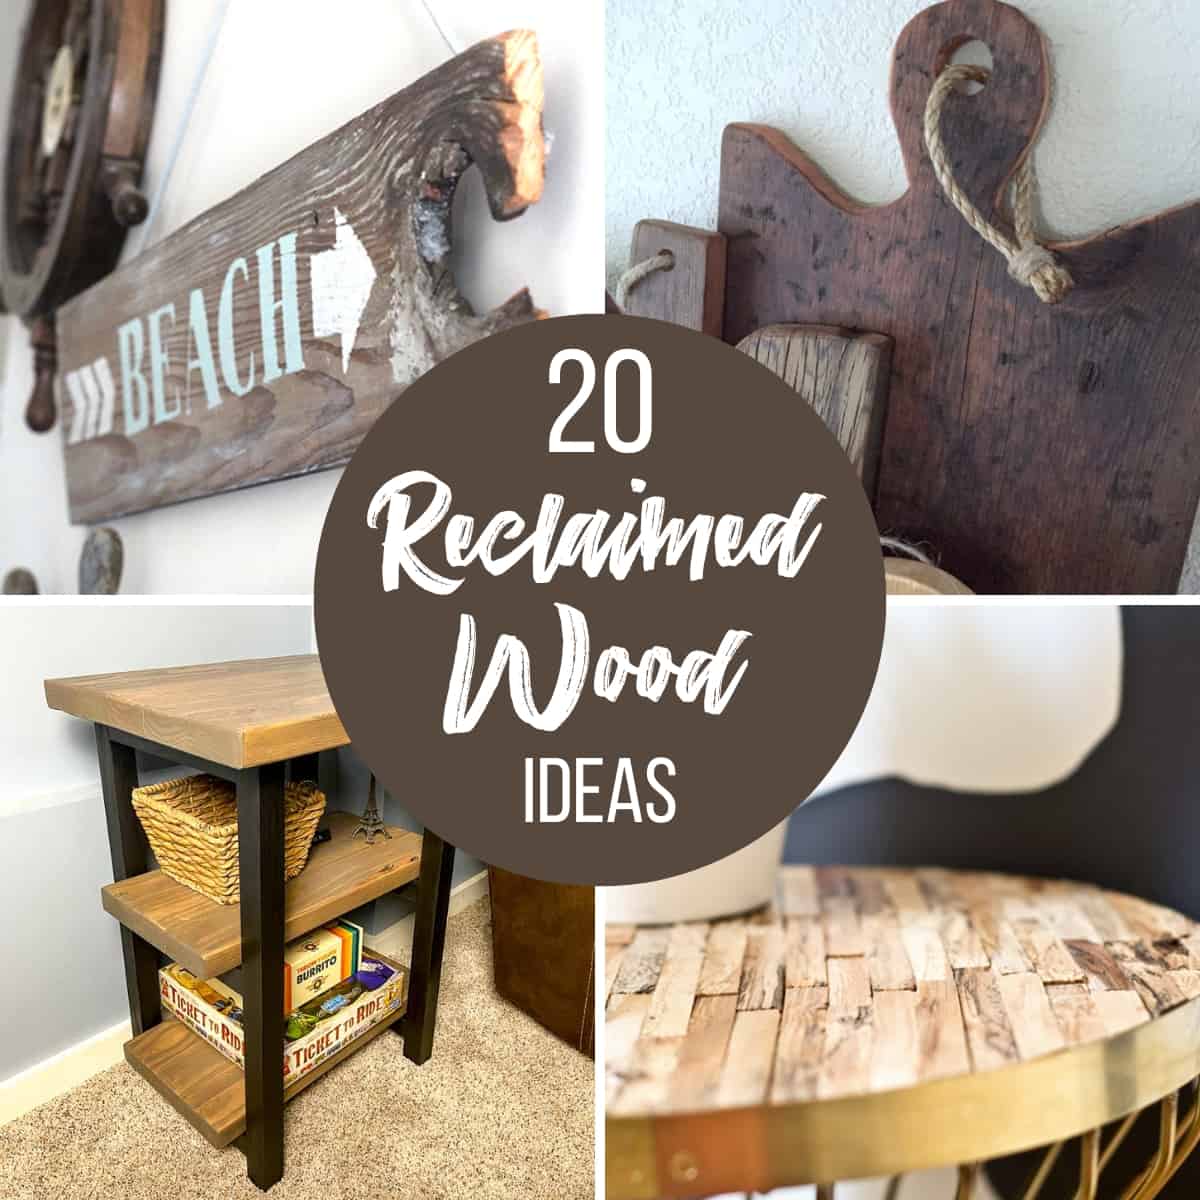 10 Incredible Home Decor Projects Using Old, Forgotten Wood